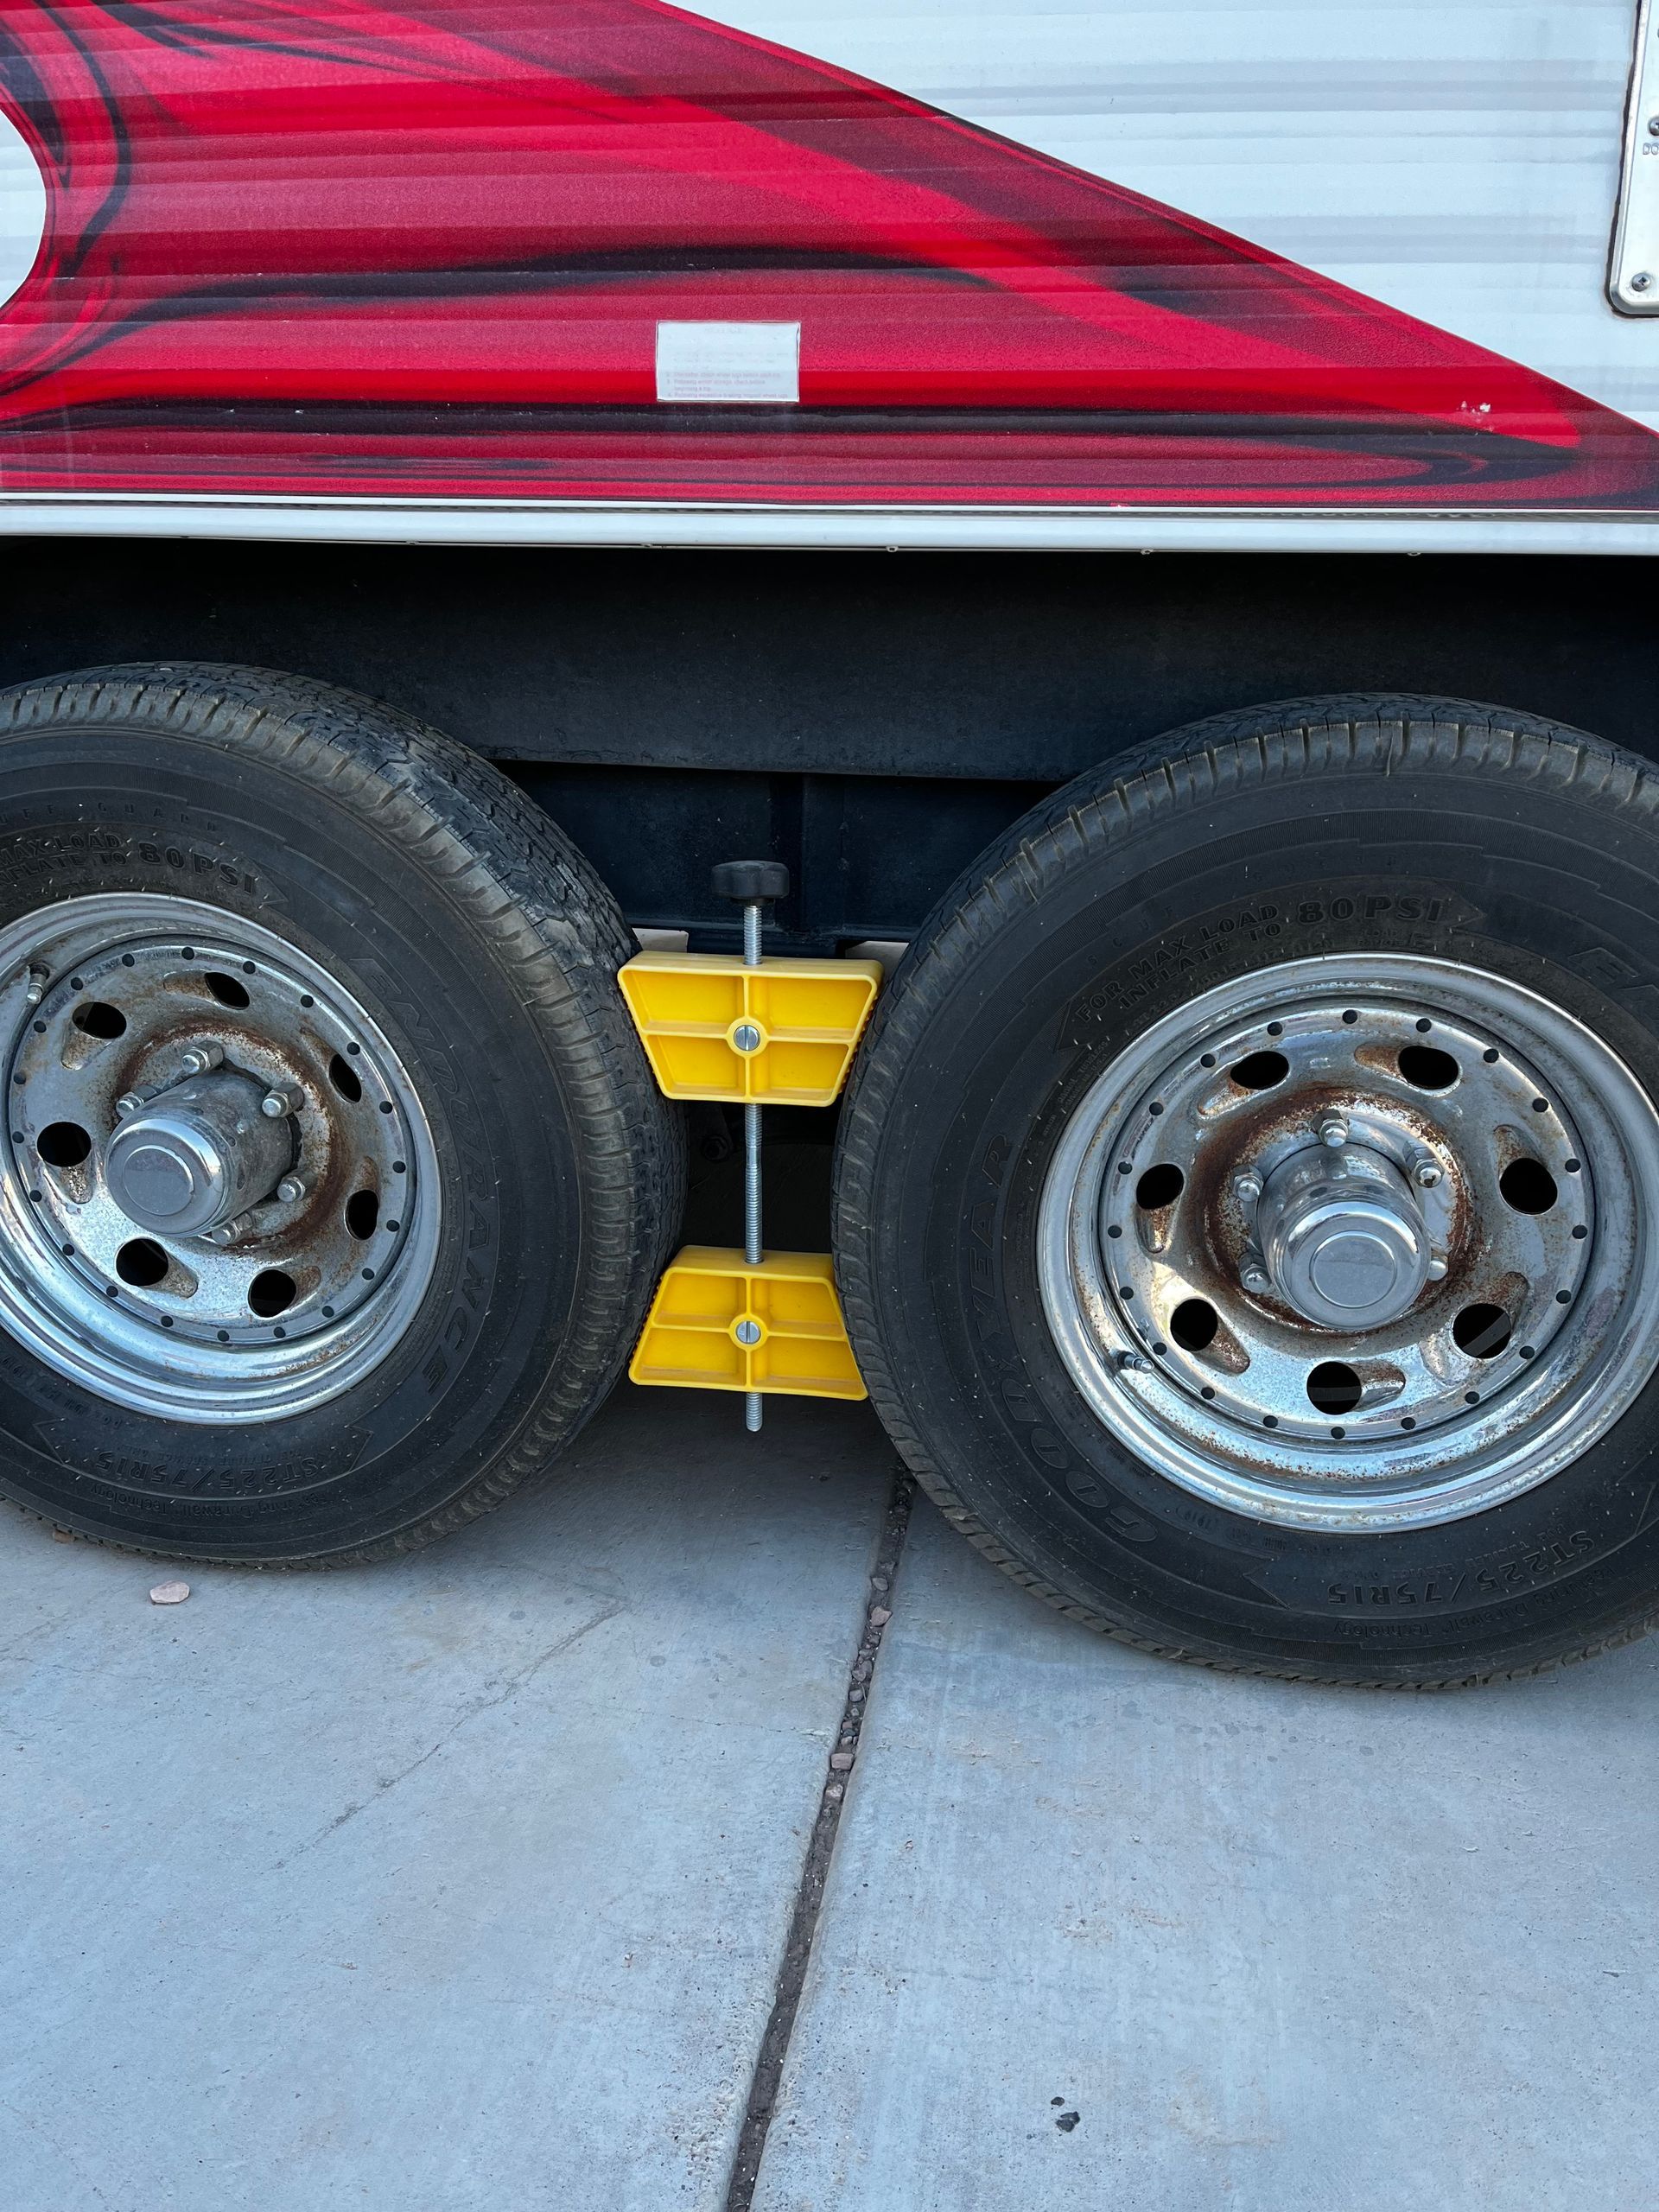 A close up of a trailer 's tires on a concrete surface.